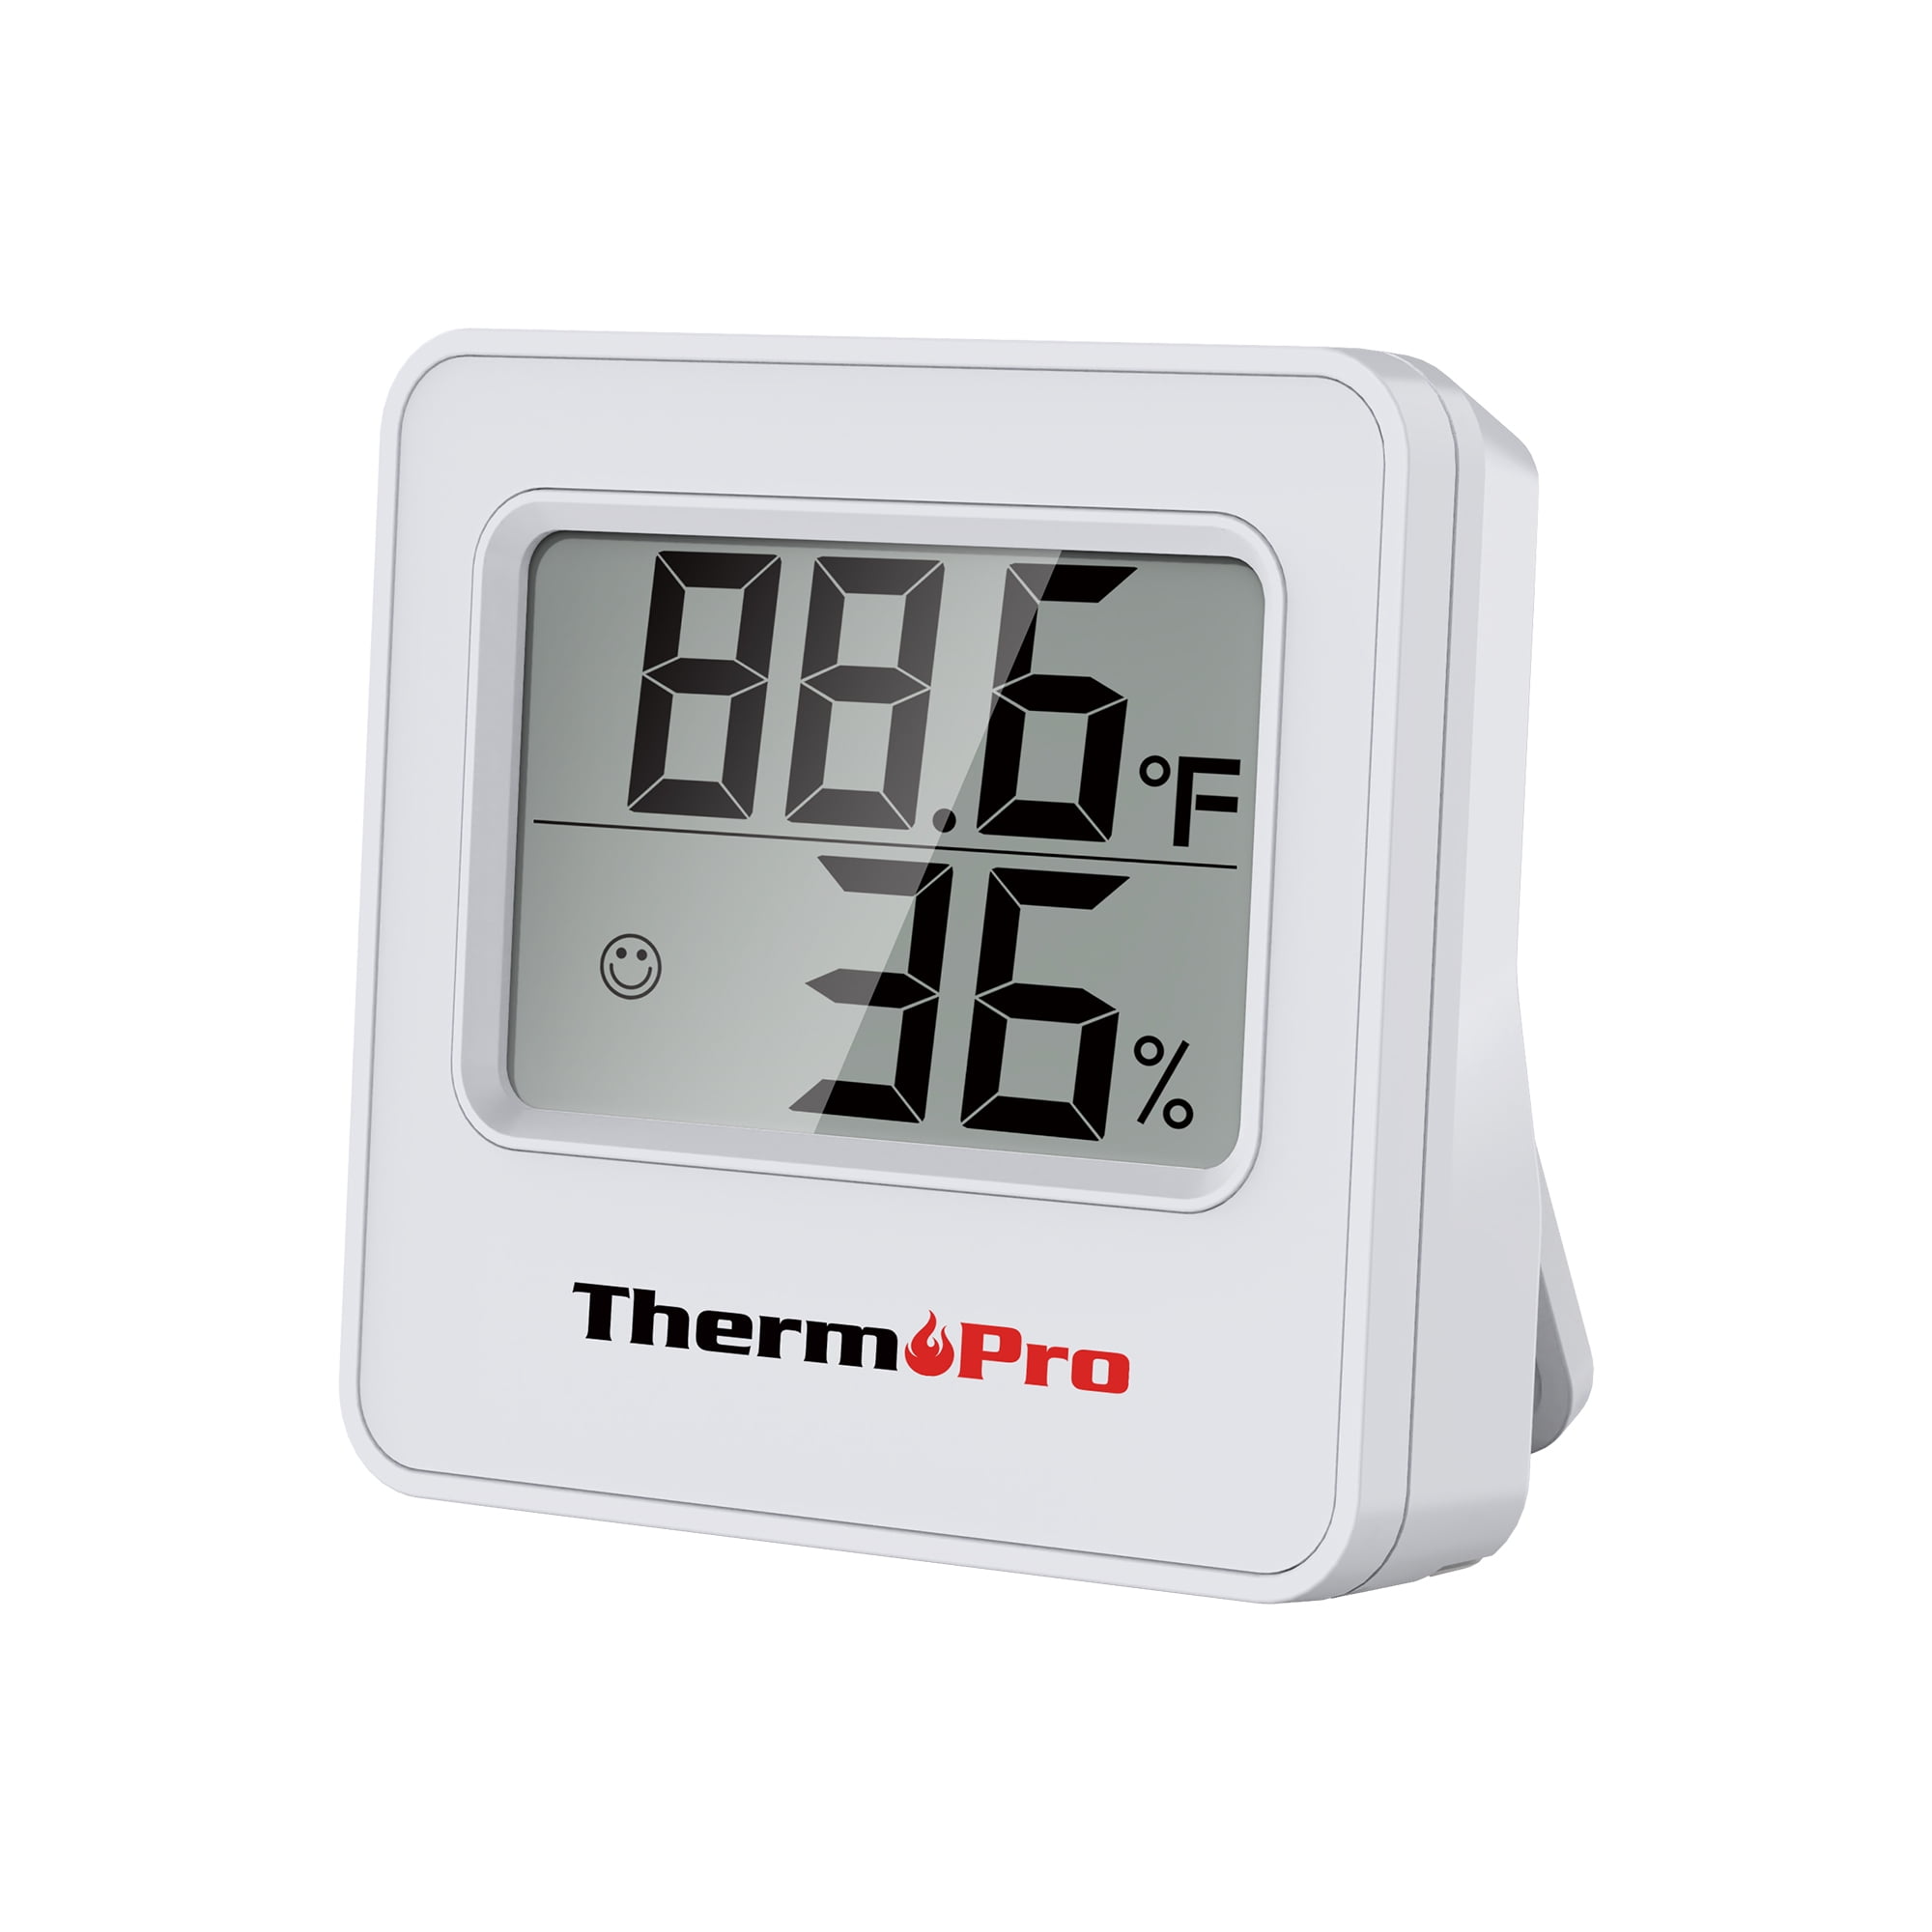 ThermoPro LCD Digital Indoor Hygrometer Thermometer Monitor Humidity G6Q4 